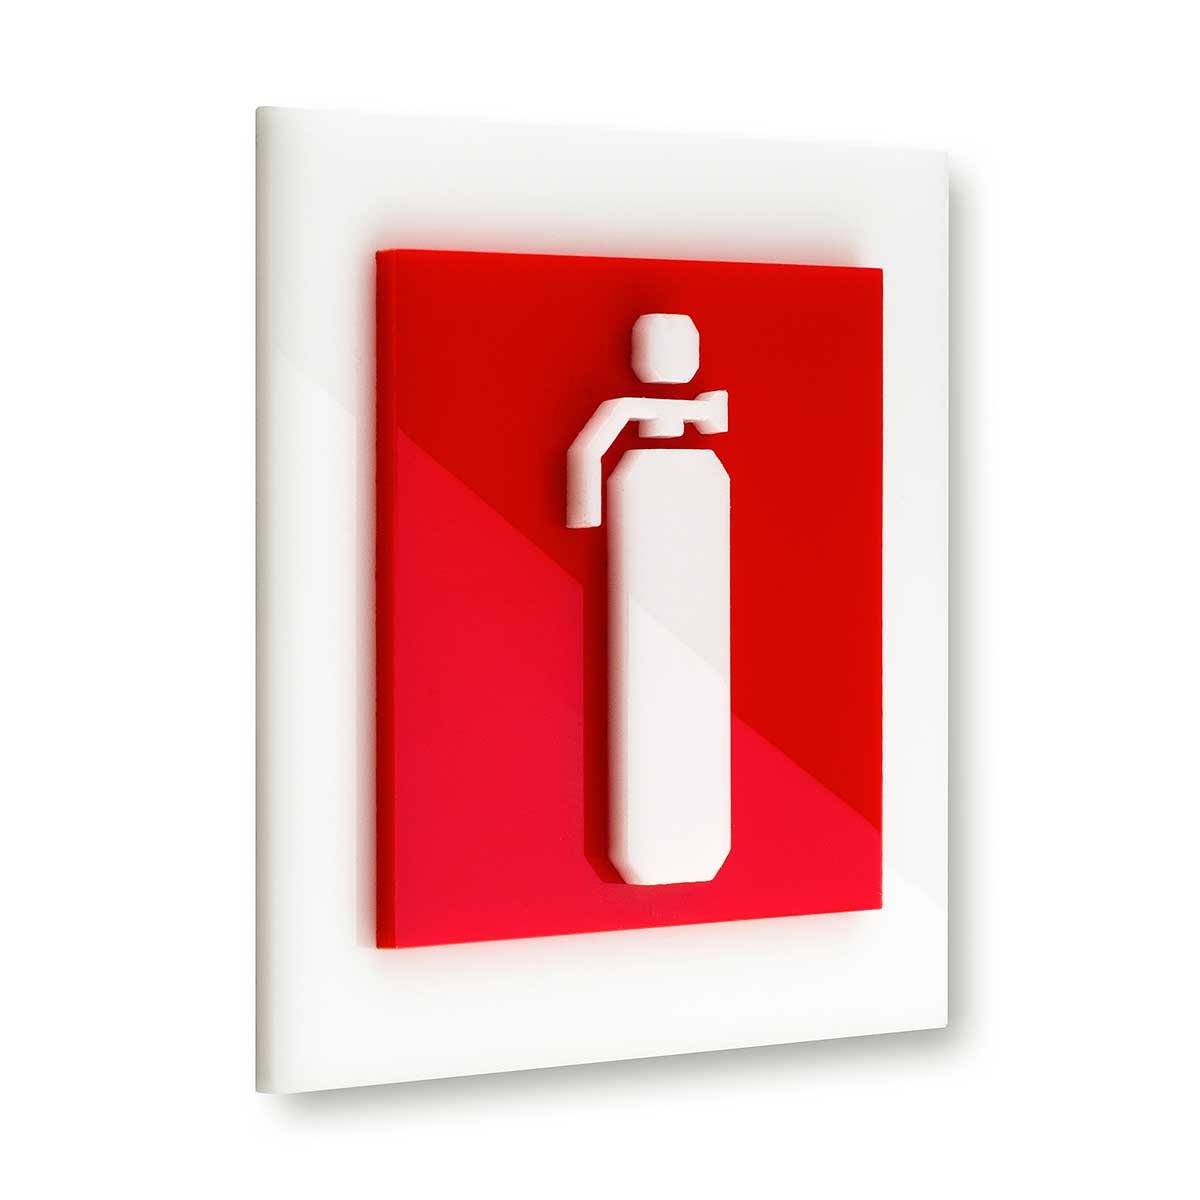  Acrylic Fire Extinguisher Safety Sign Information signs white base Bsign